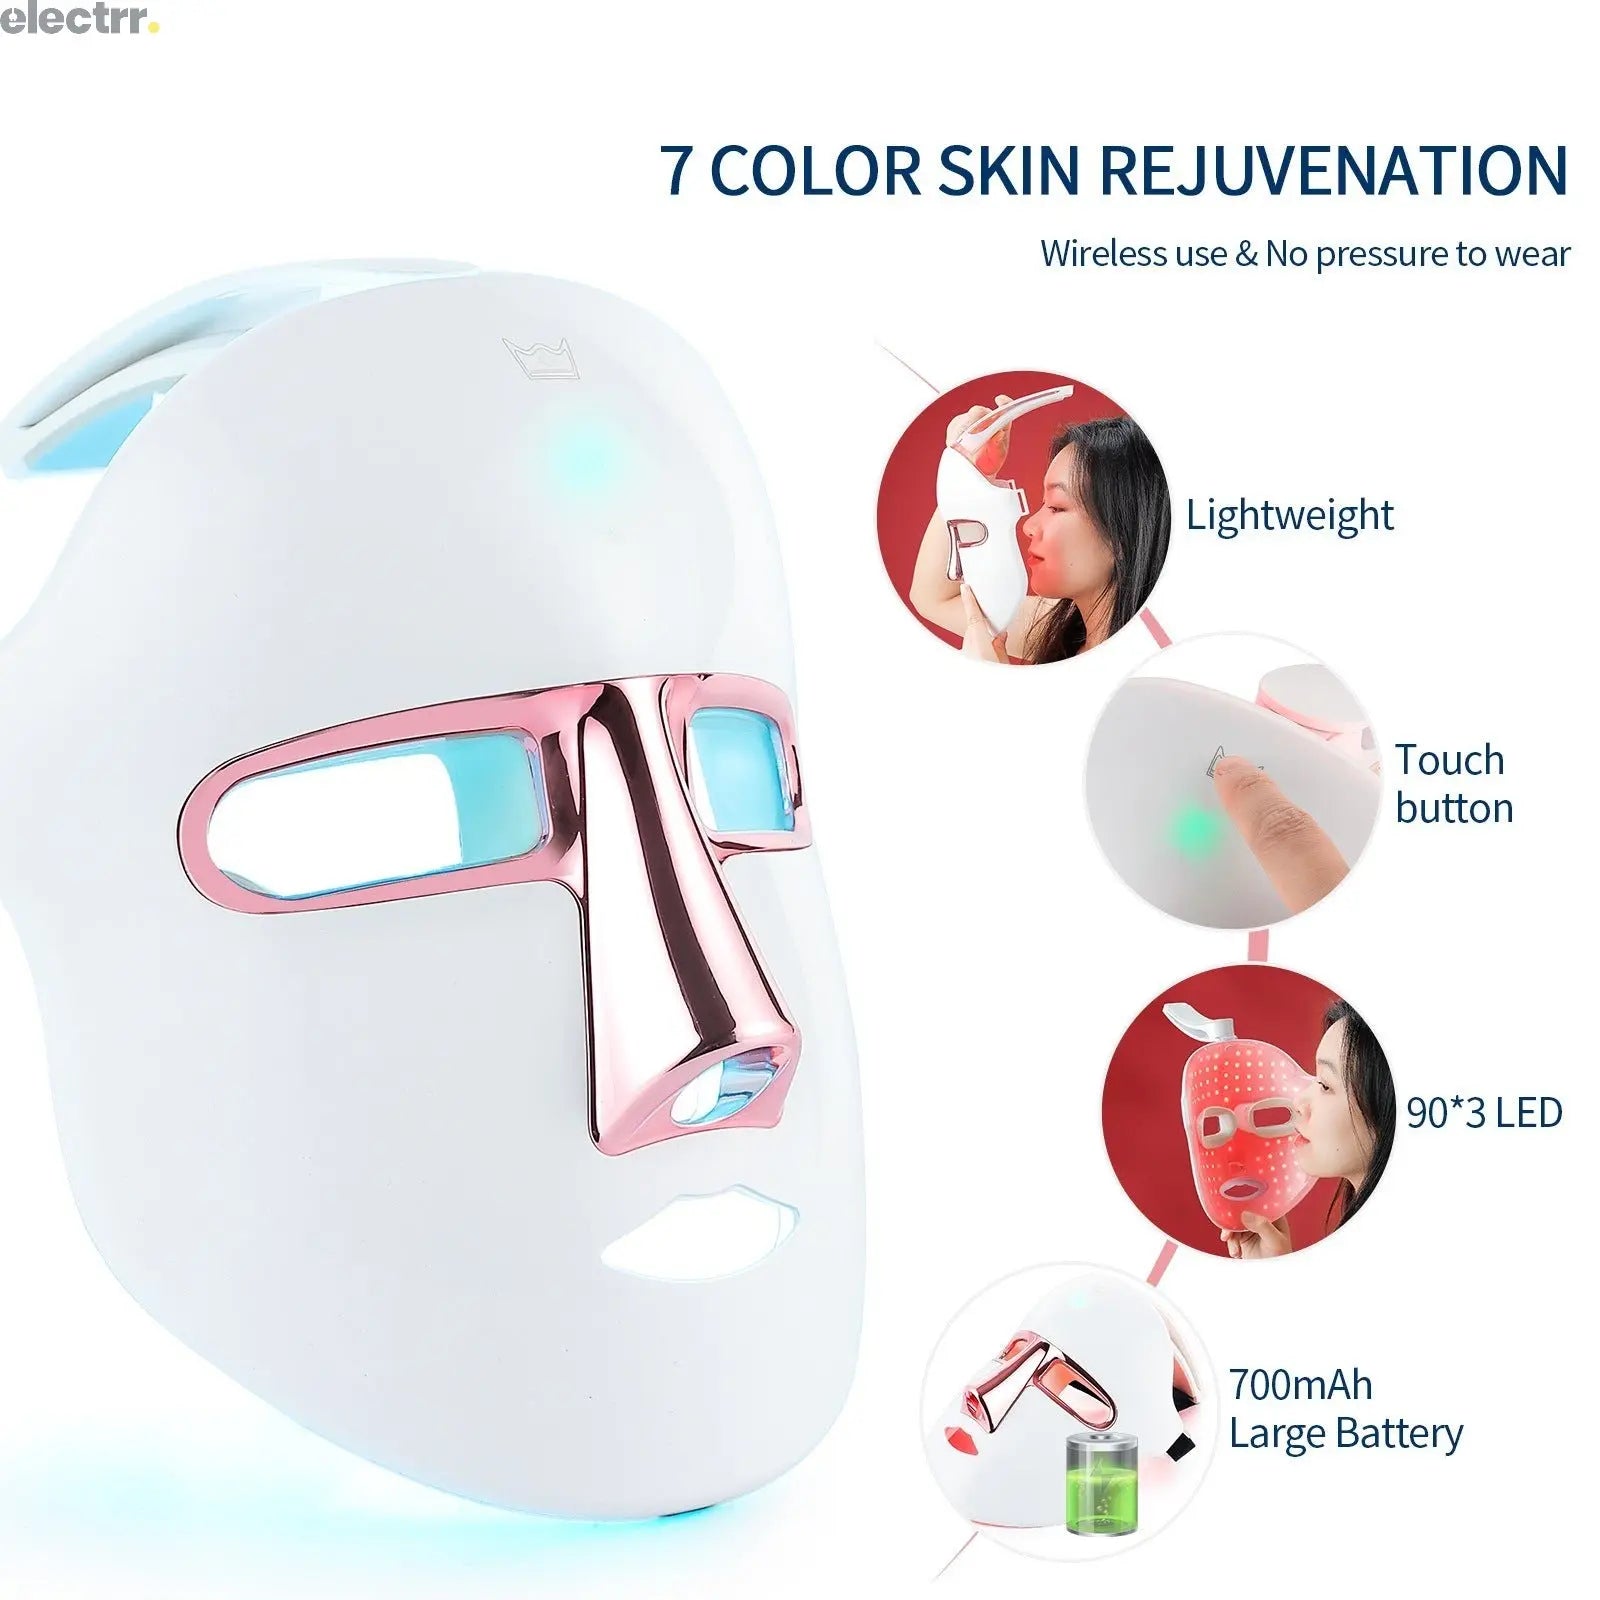 Professional homes use skin rejuvenation pdt led face maskss lightening skin care therapy machine blue red light device | Electrr Inc